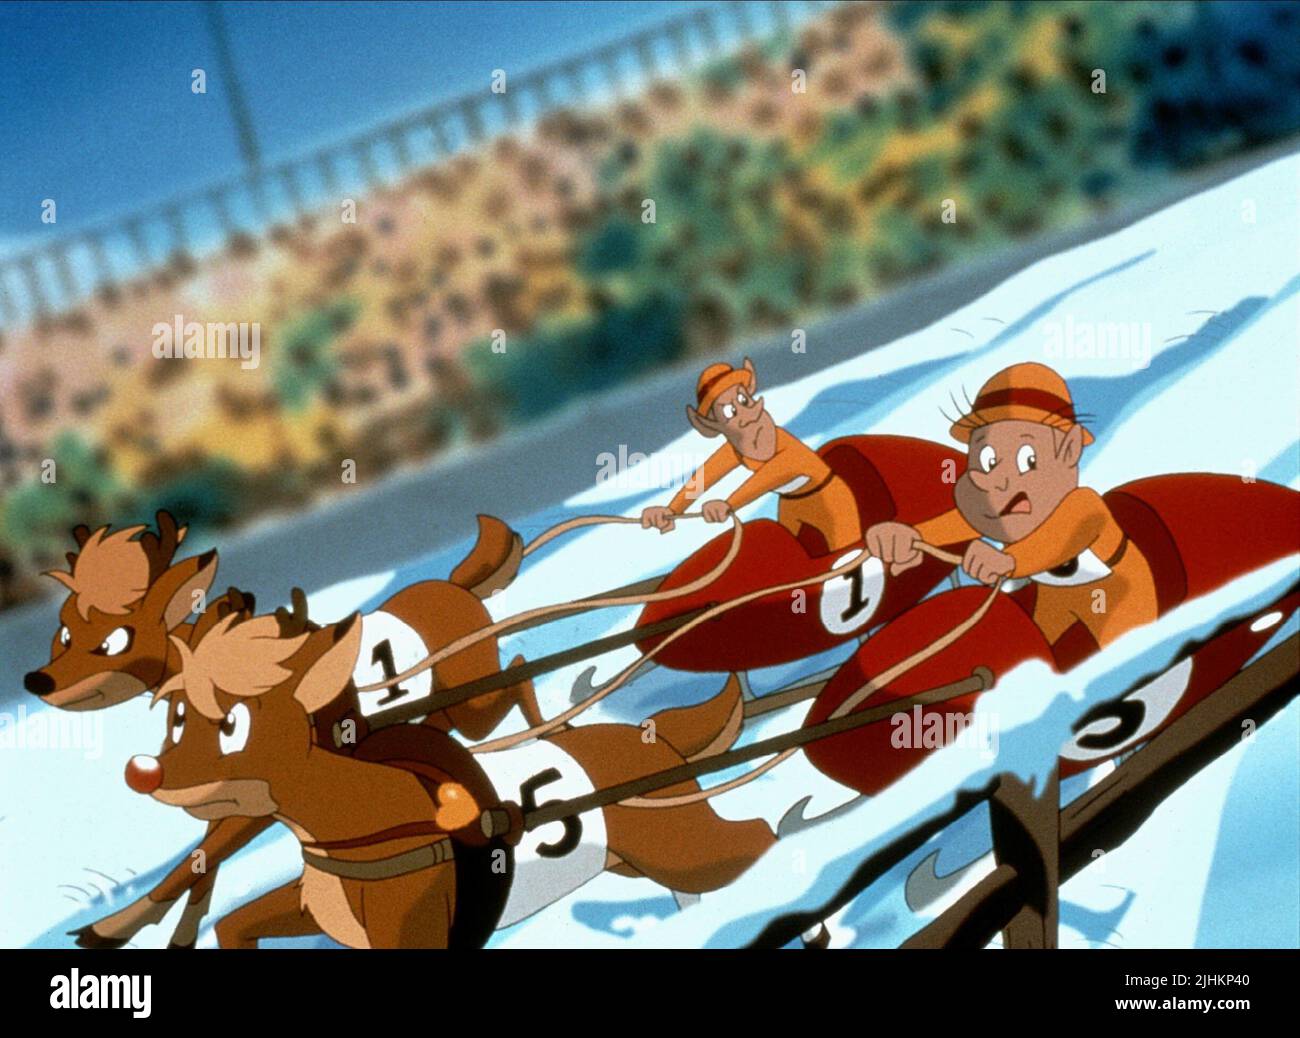 RUDOLPH, ARROW, RUDOLPH THE RED-NOSED REINDEER, 1998 Stock Photo